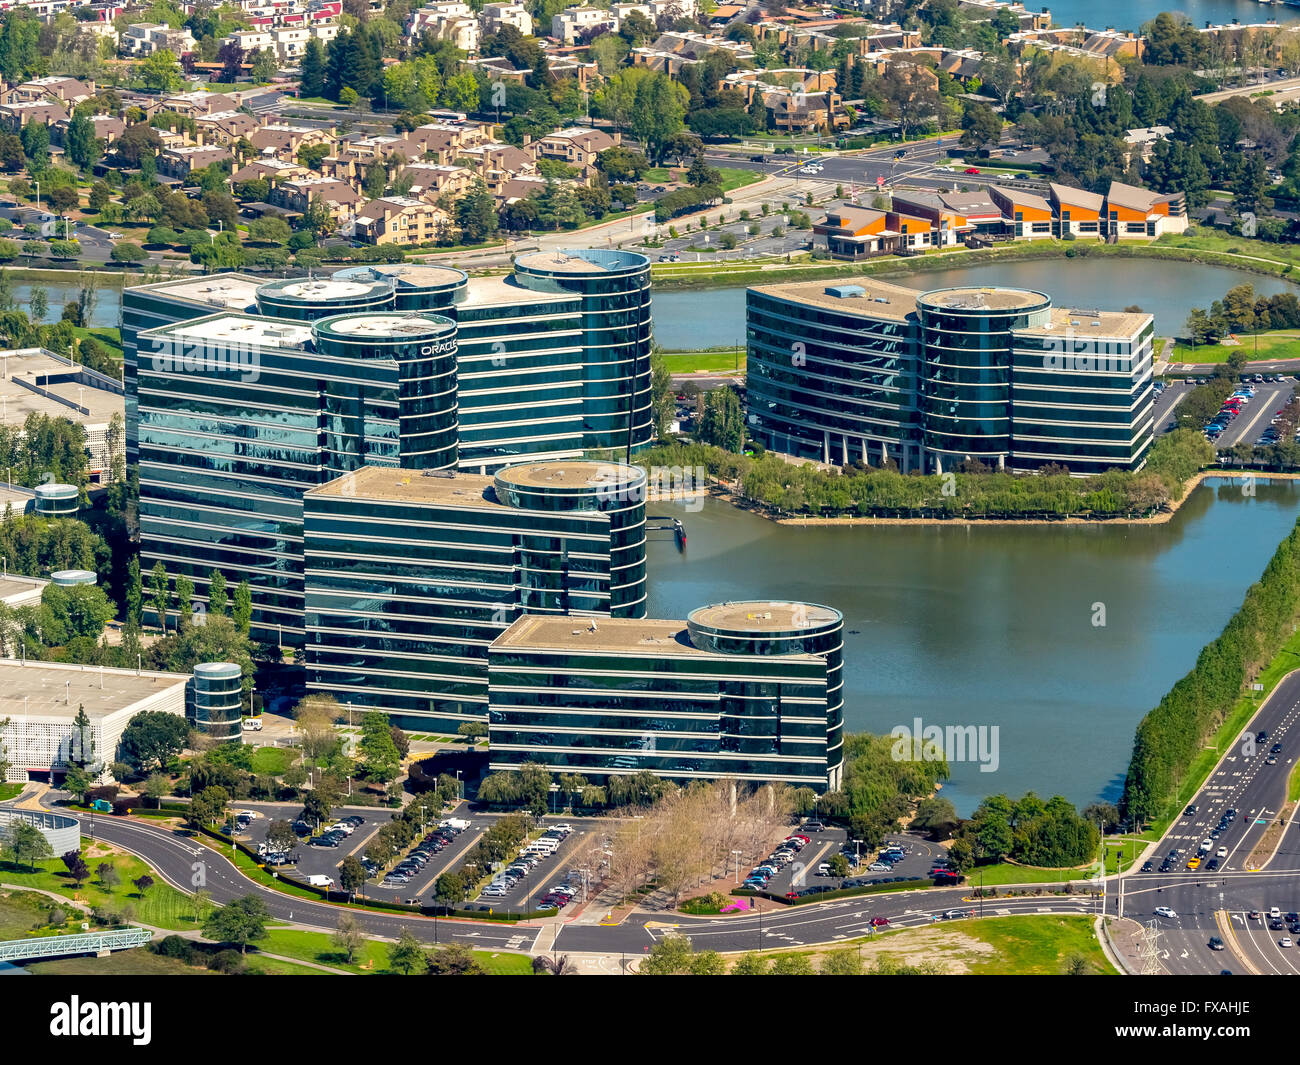 Oracle headquarters in Redwood Shores, Silicon Valley, California, USA Stock Photo